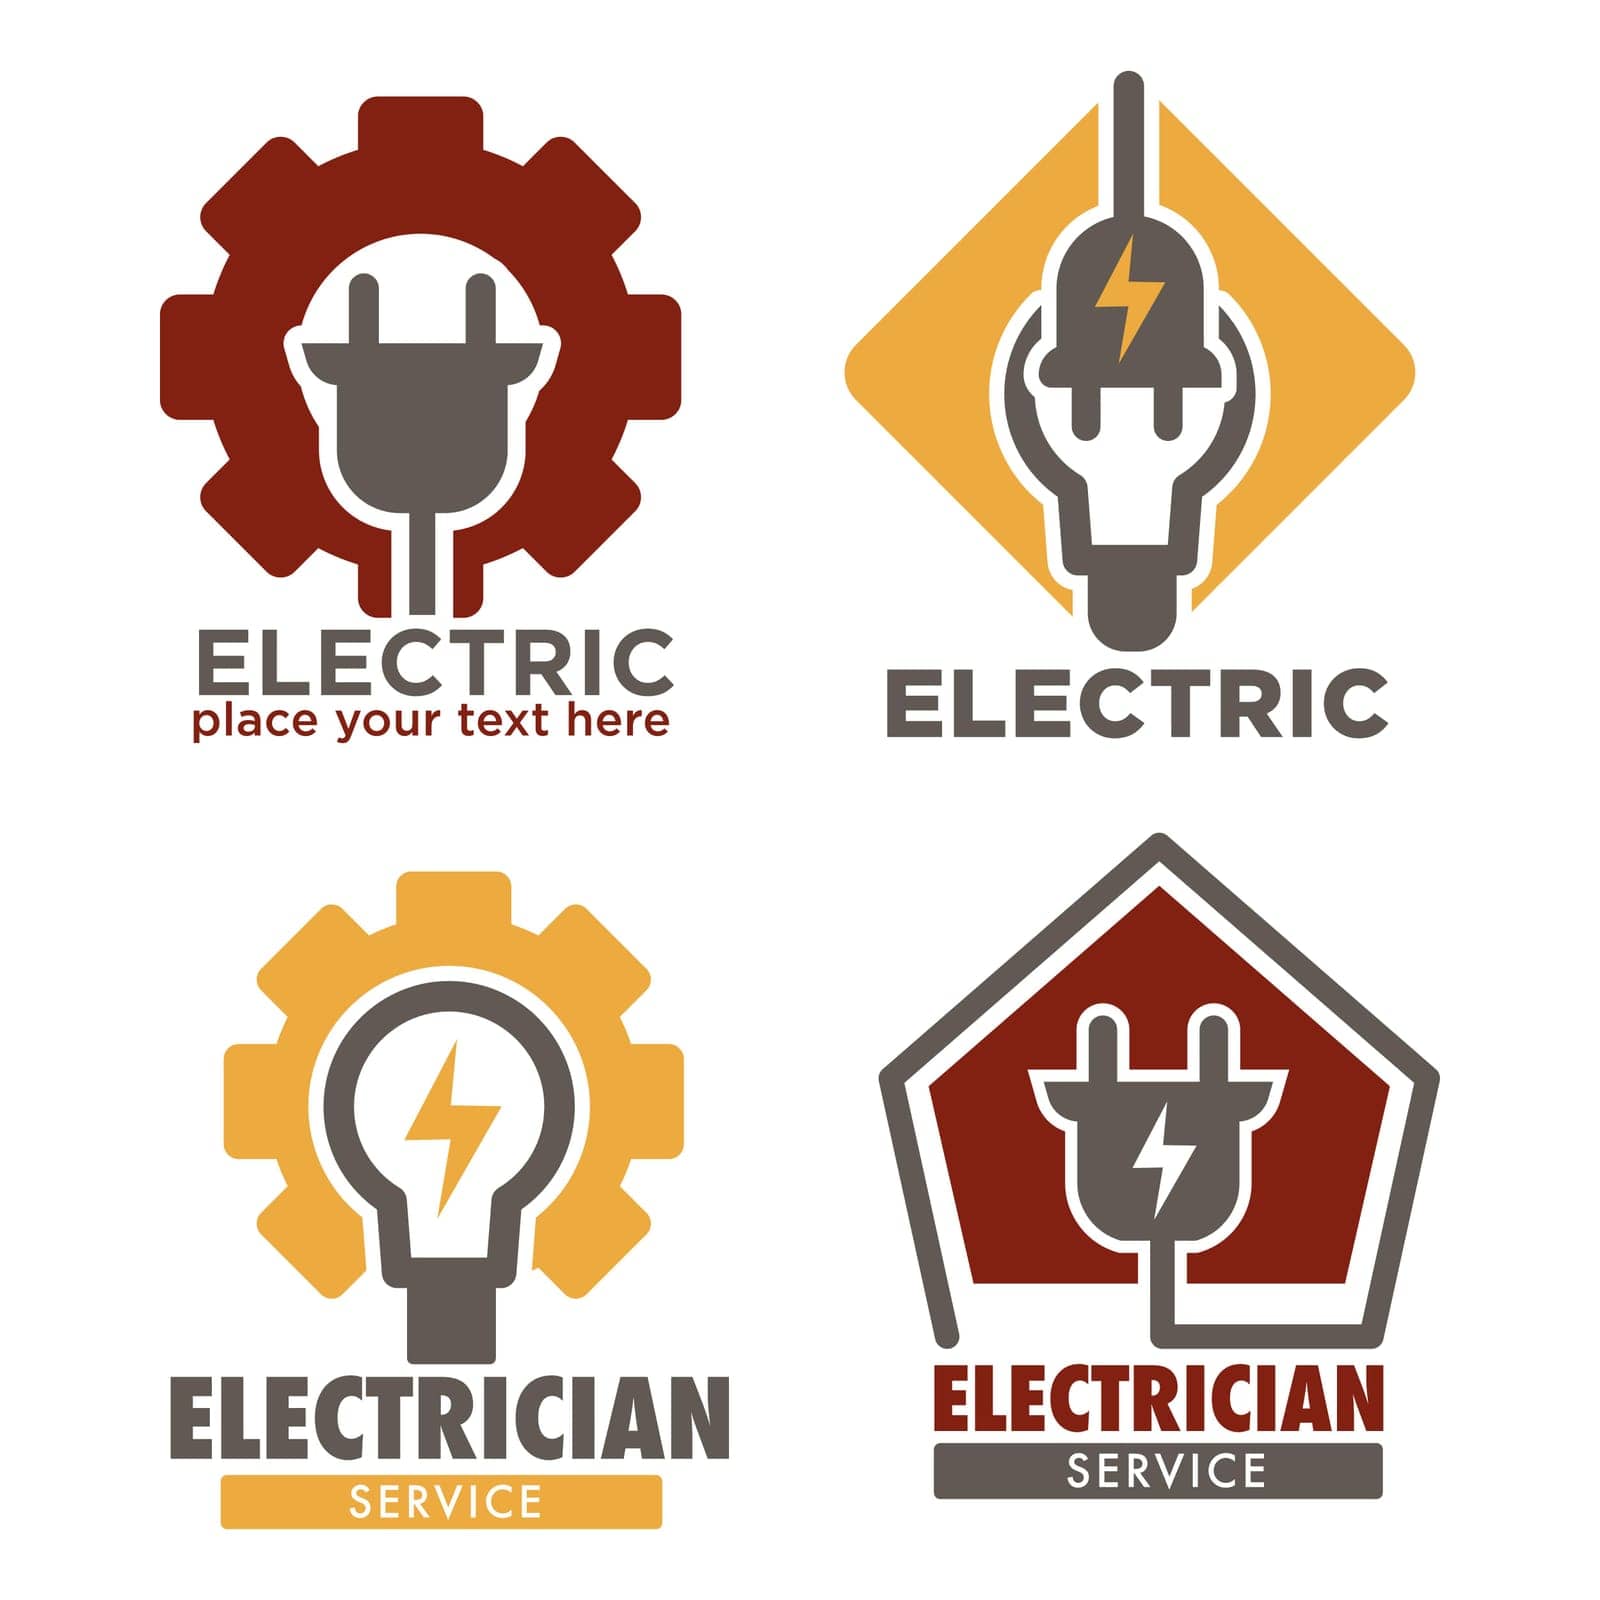 Electrician service isolated icons electricity repair works by Sonulkaster